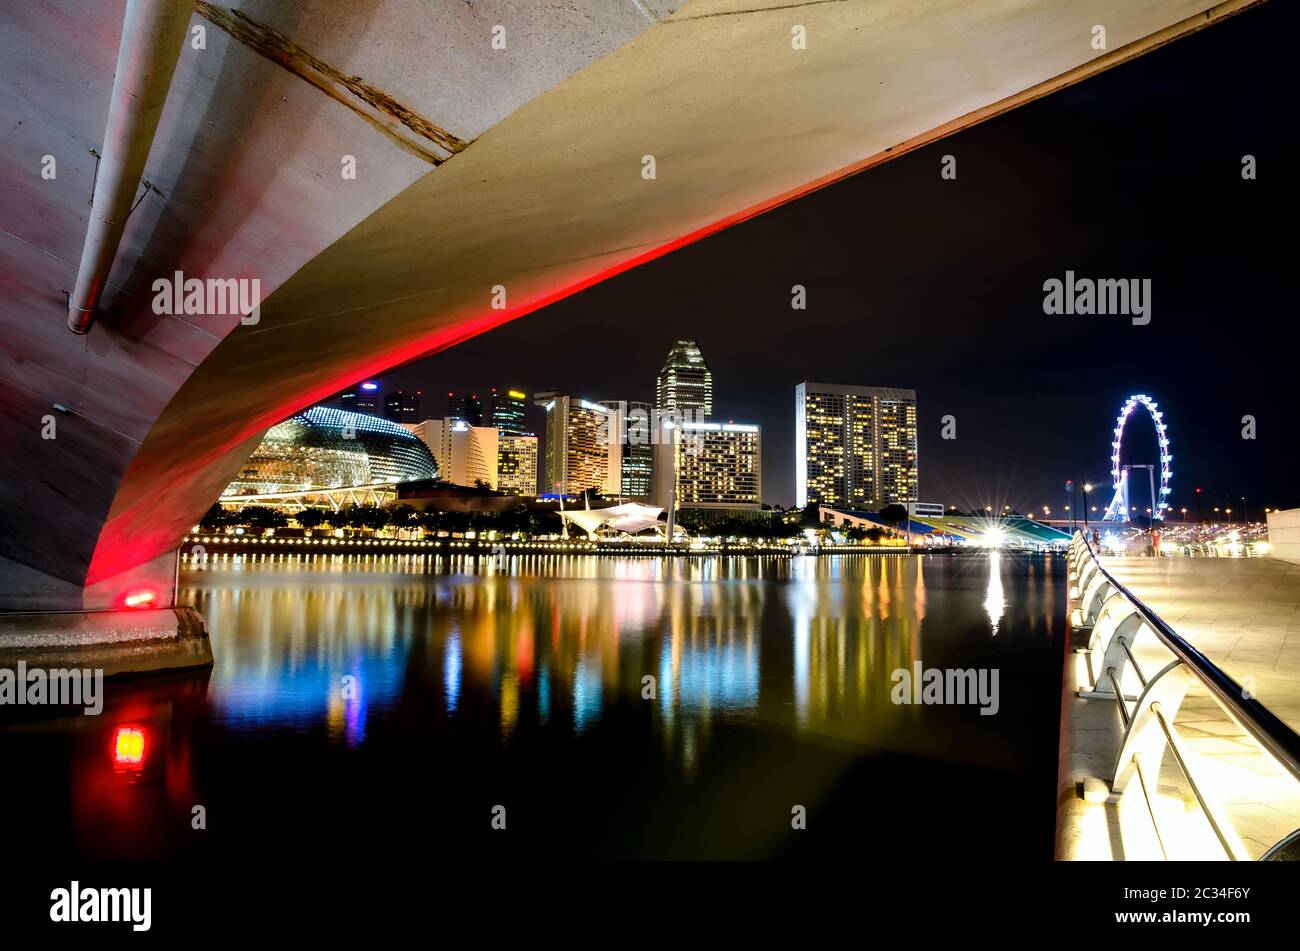 The view across the bay to the Singapore night bridge, skyscrapers and bright lights Stock Photo